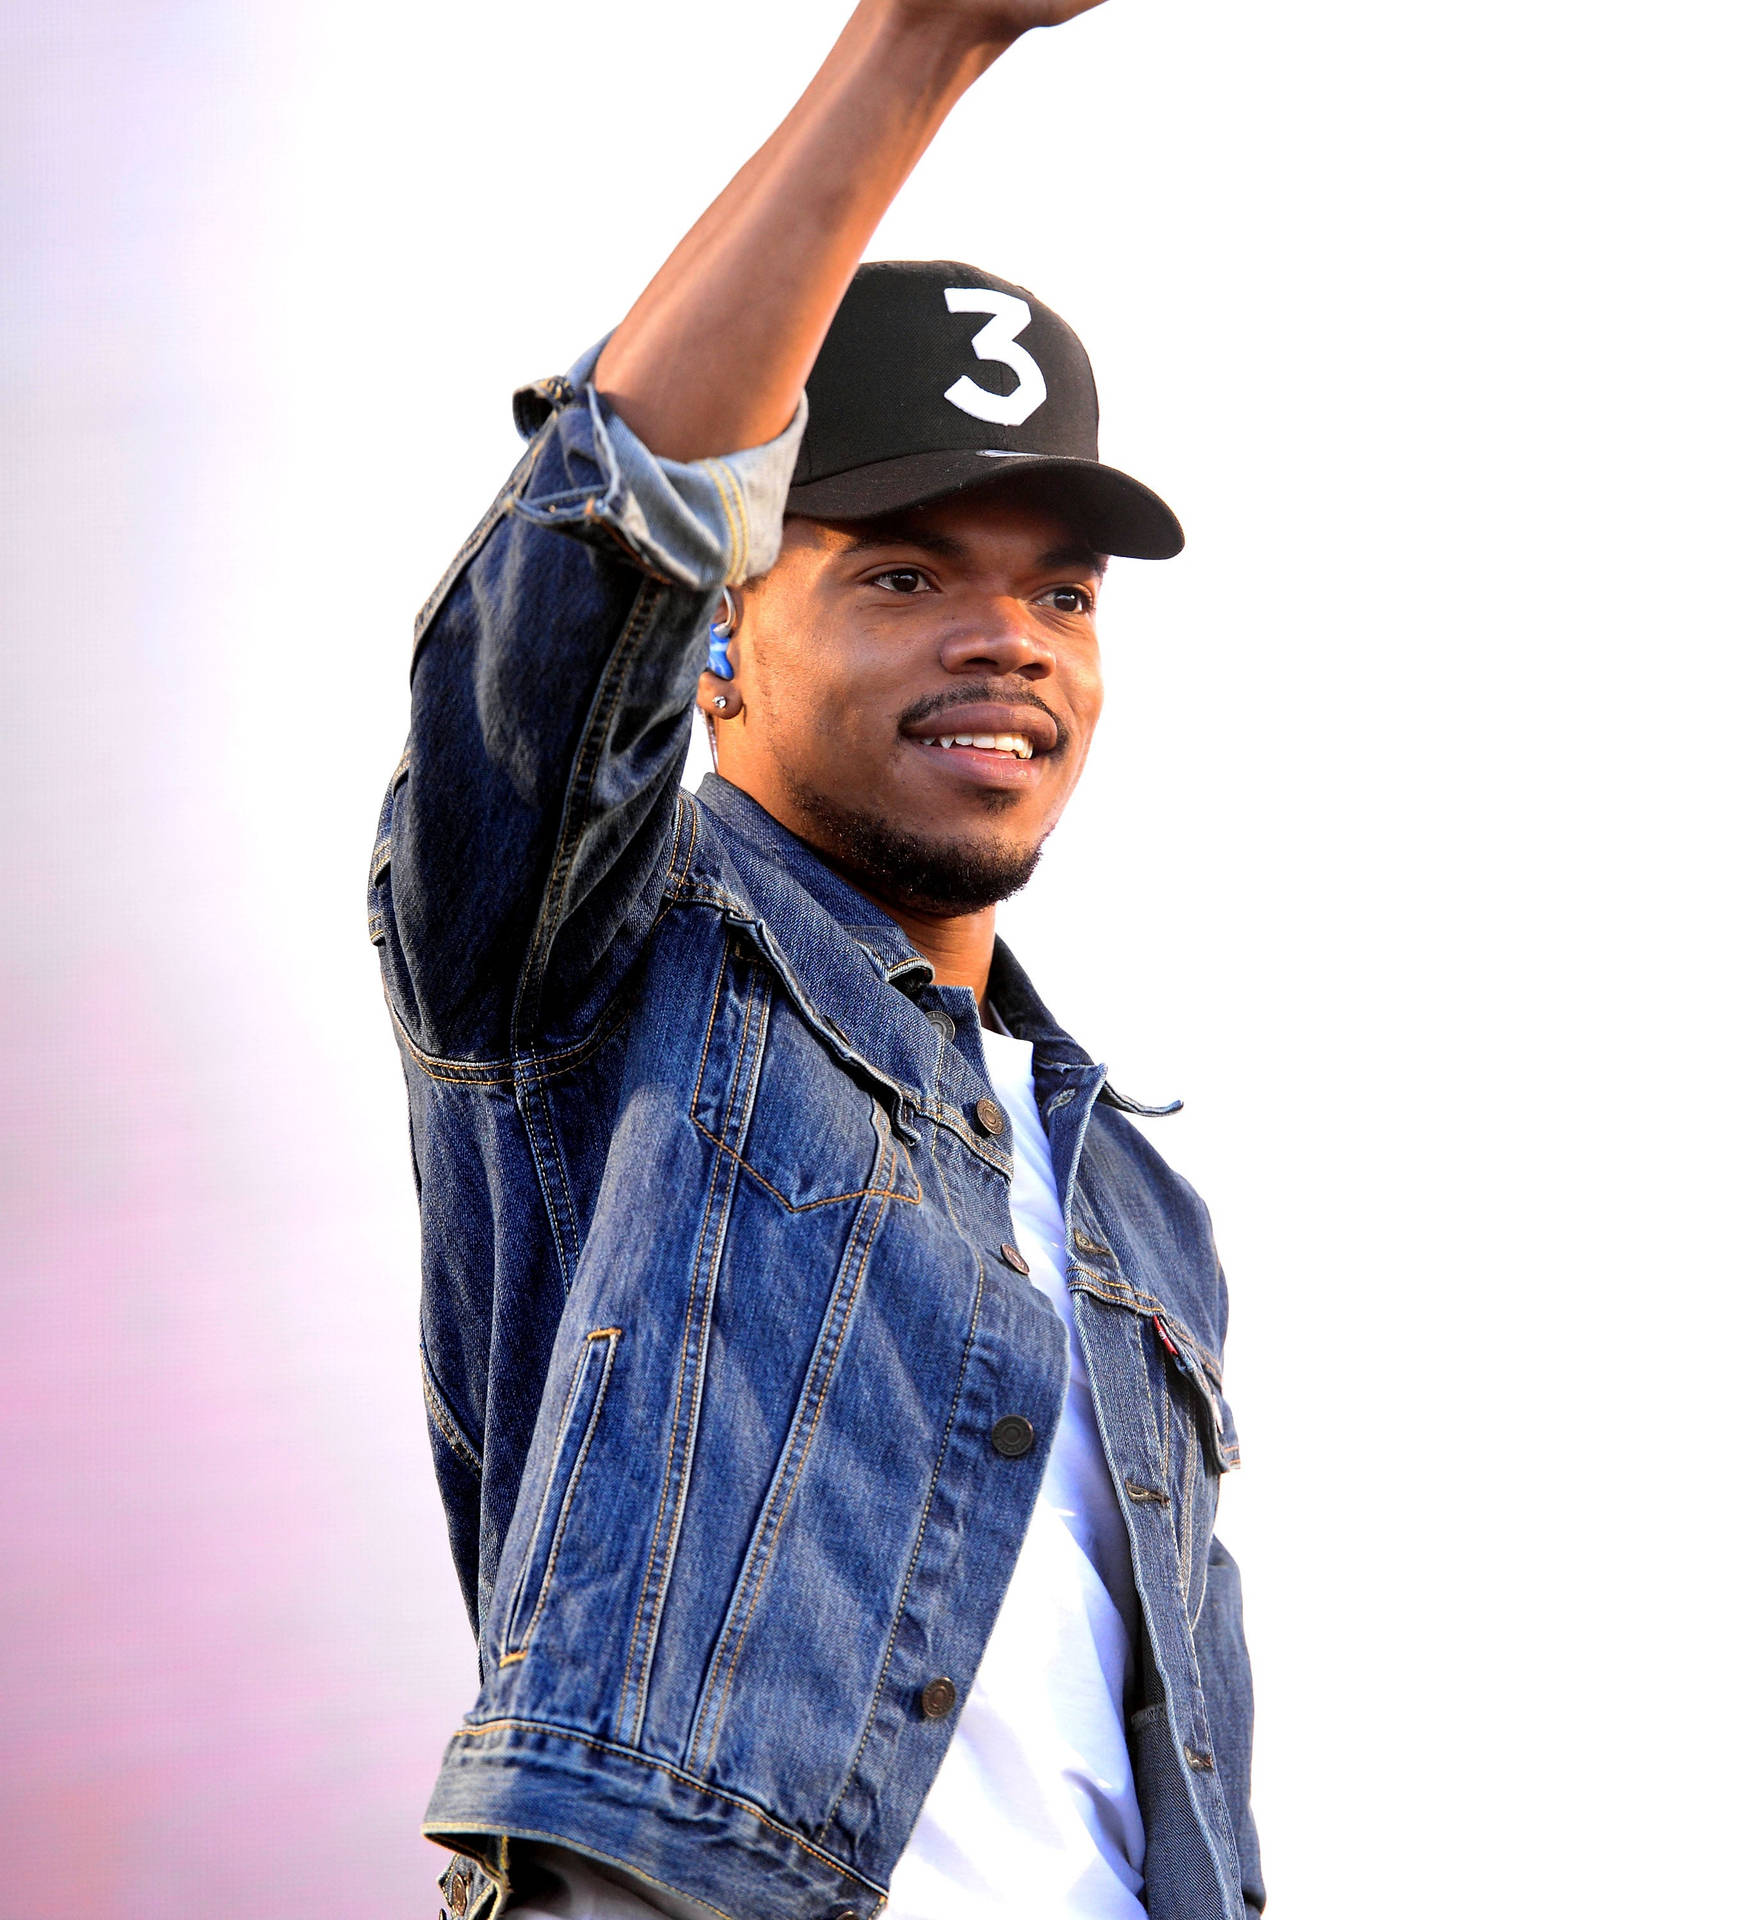 Cheery Chance The Rapper